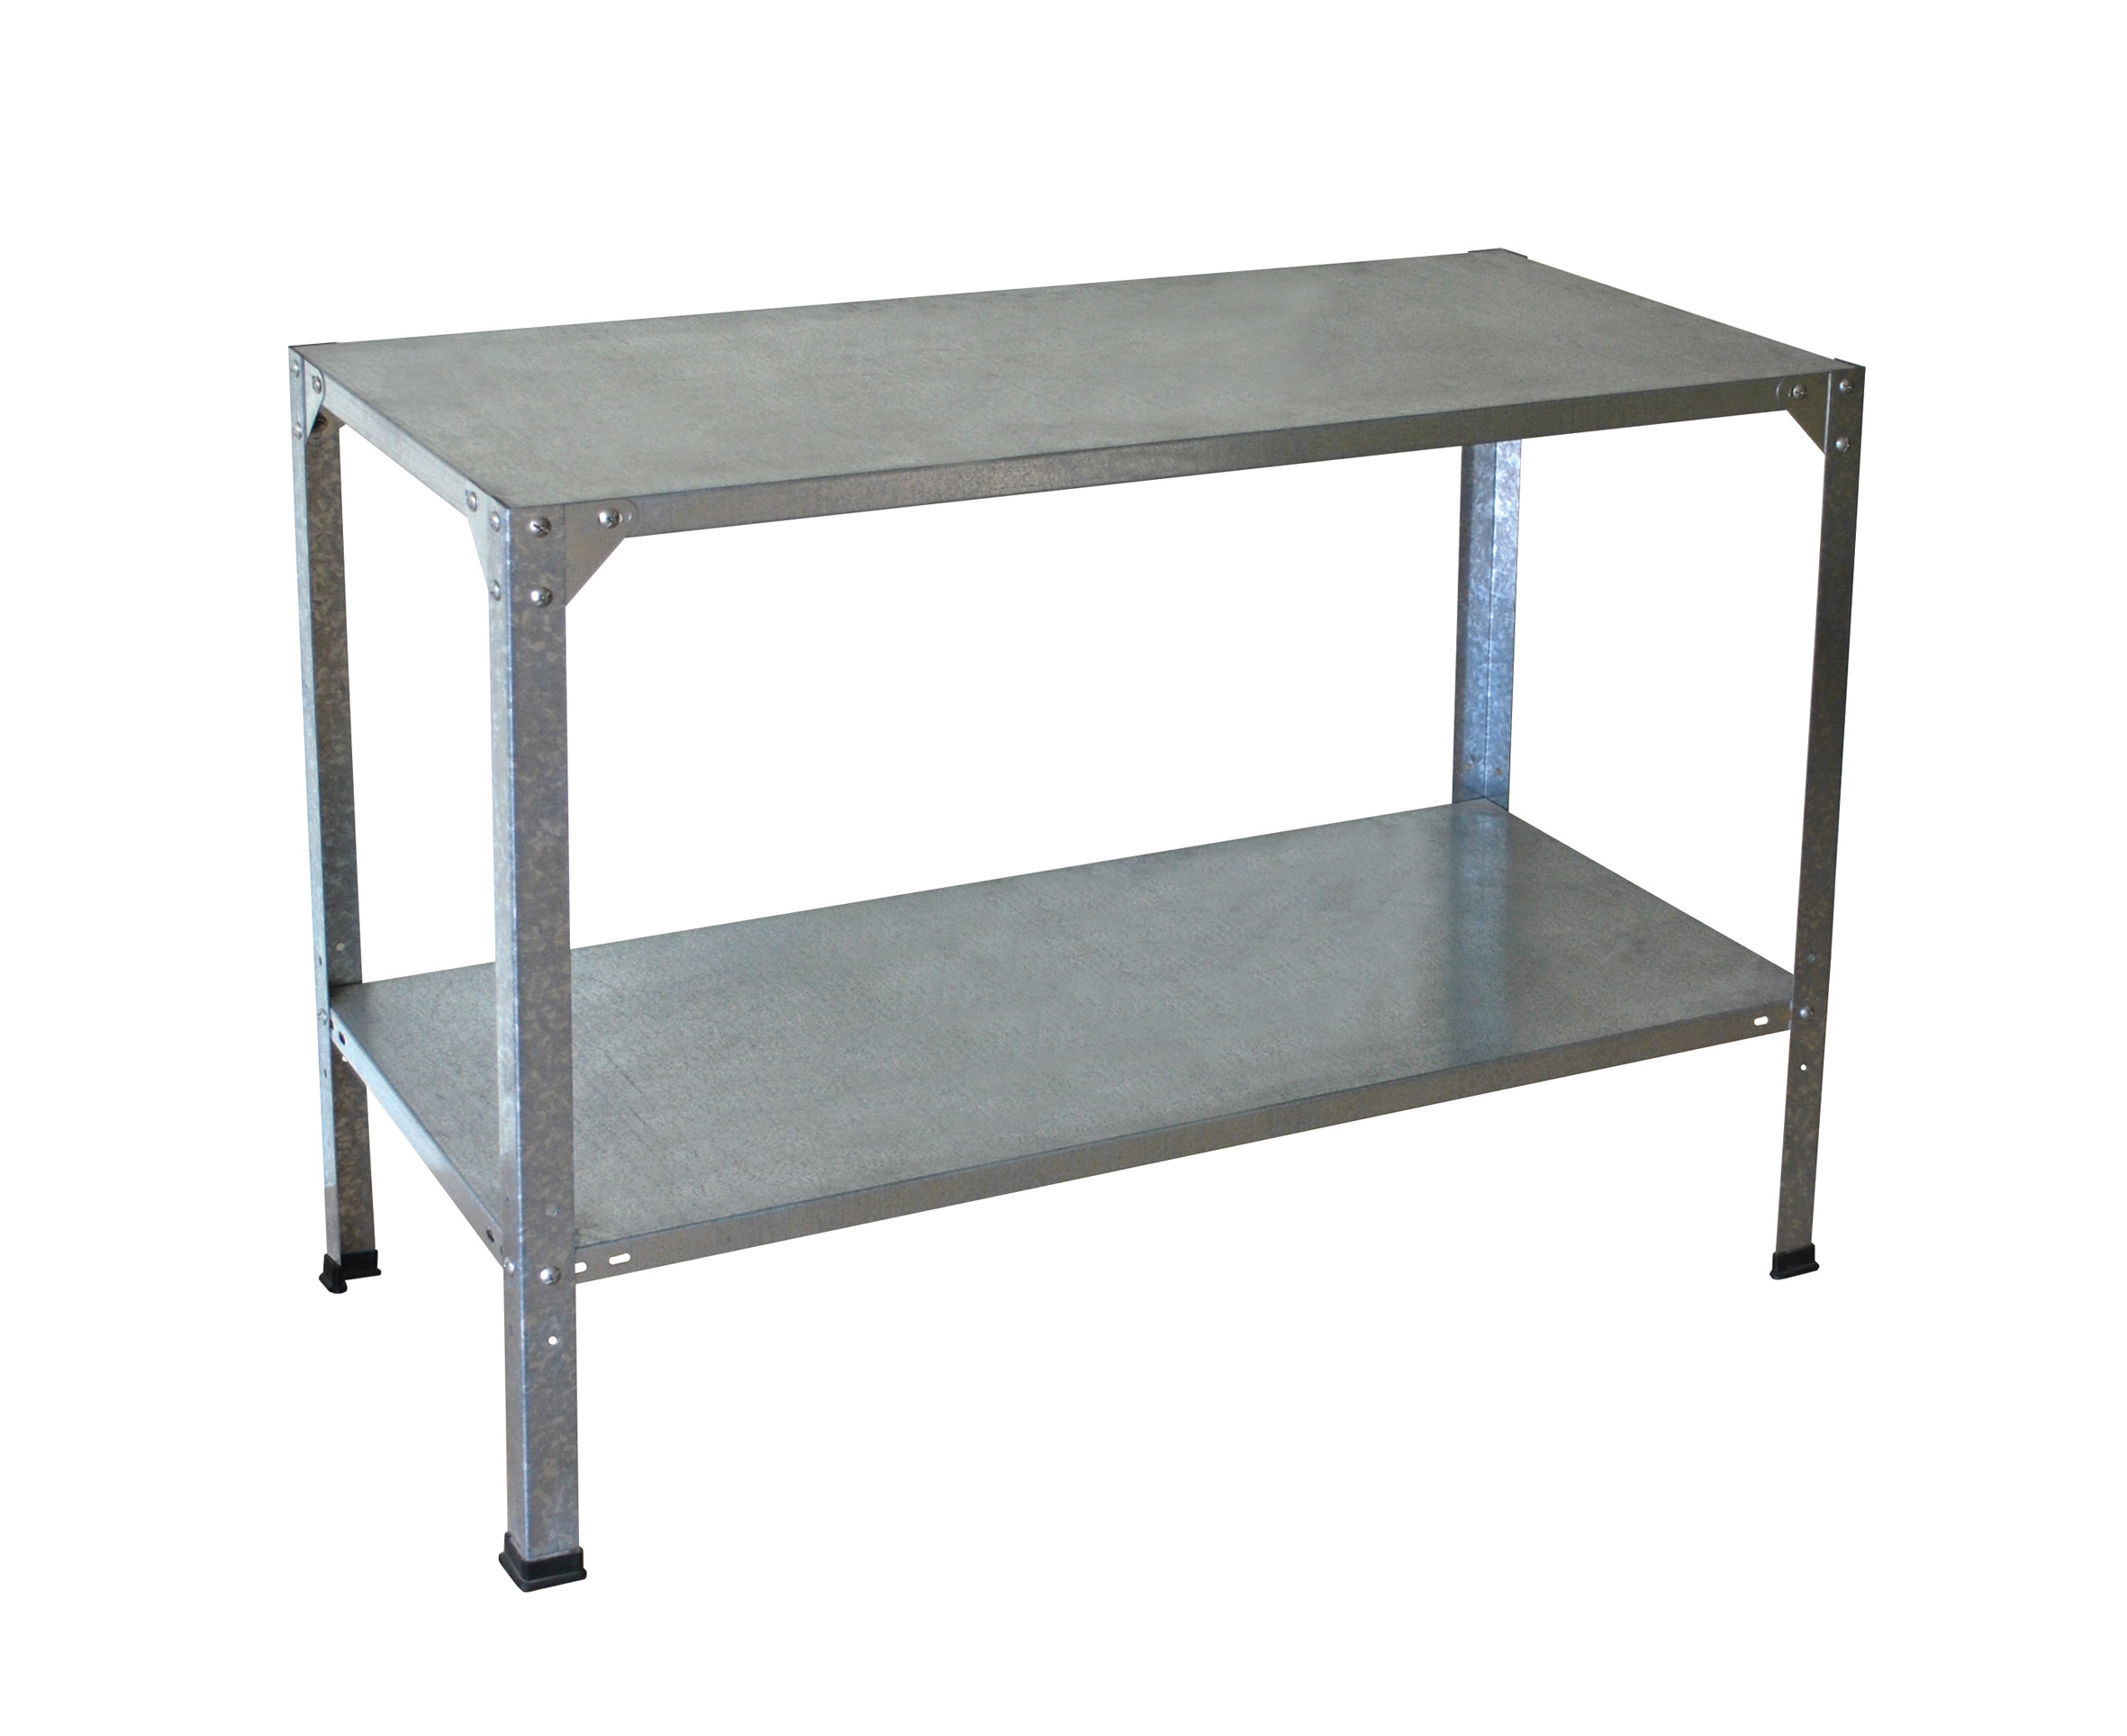 Featured image for “Palram Canopia® | Steel Work Bench”